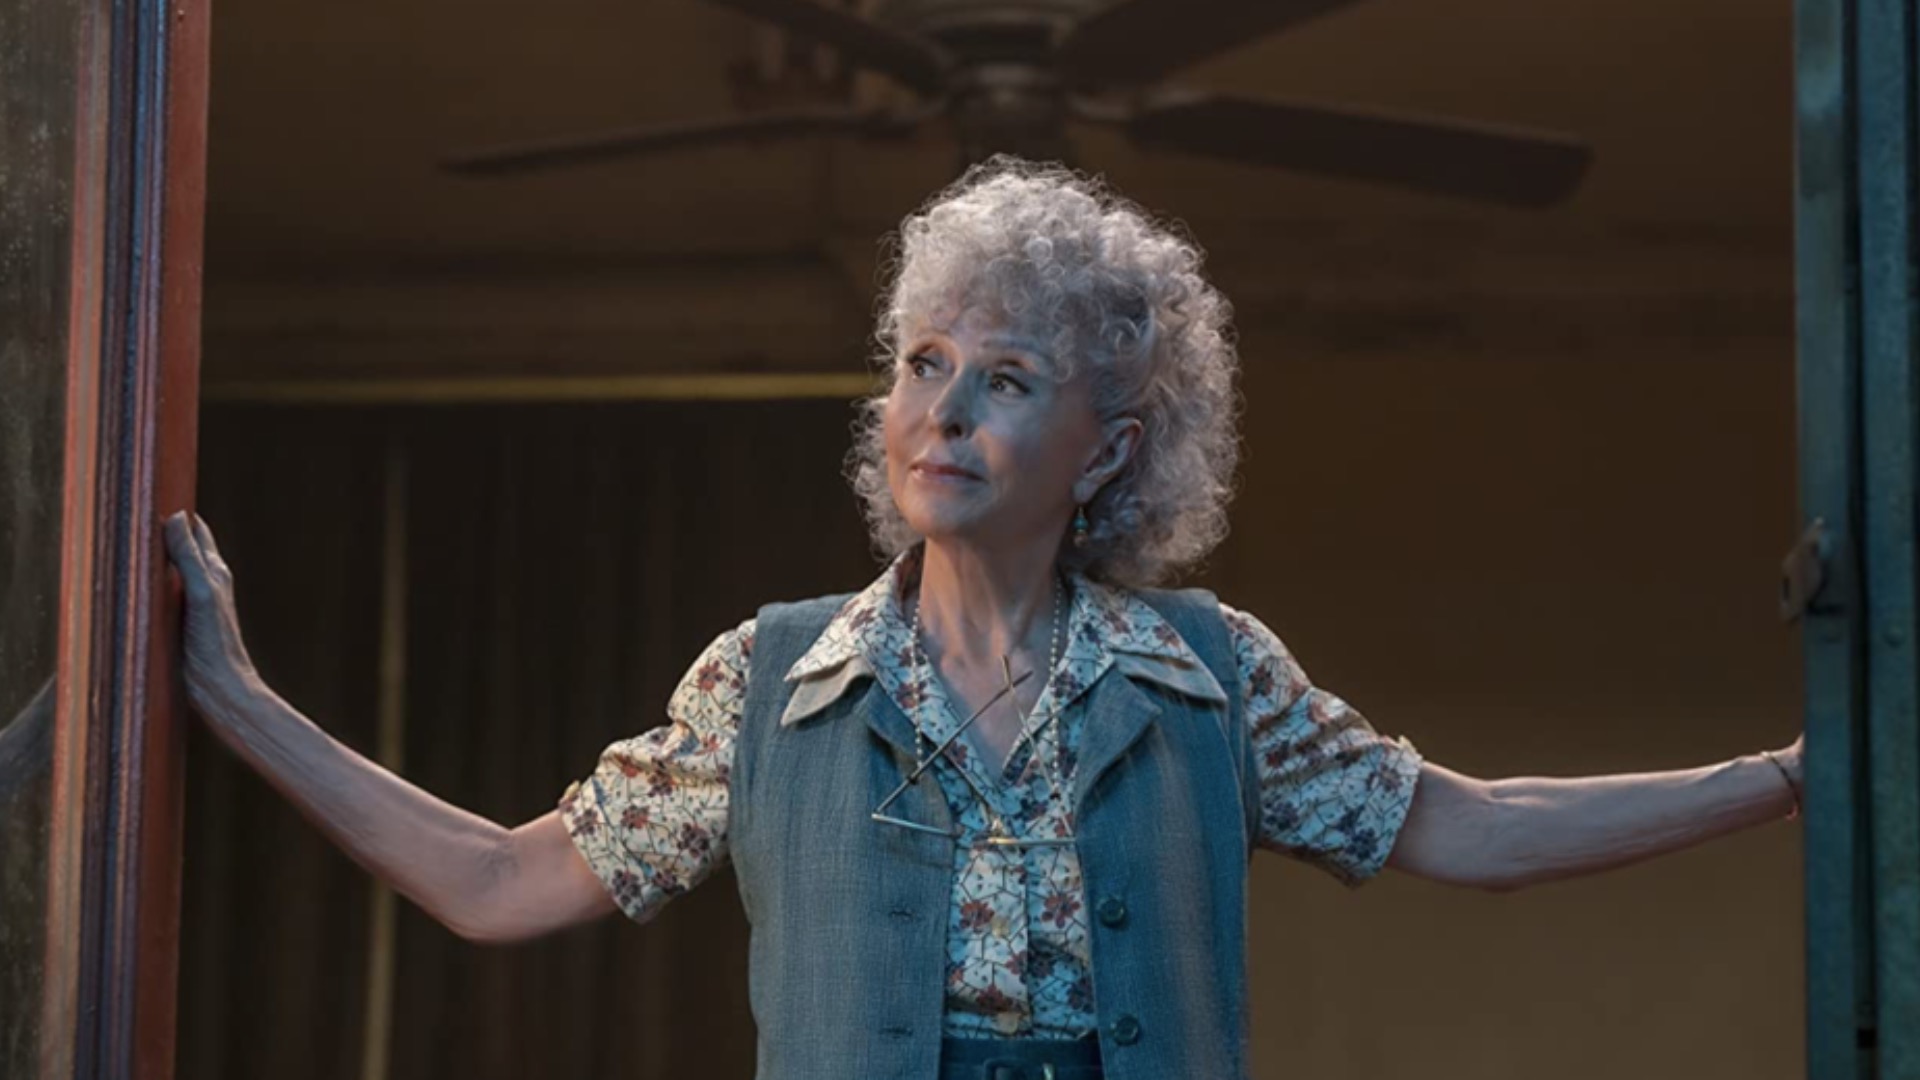 The Fast 10 family grows again as Rita Moreno joins cast as Vin Diesel’s grandmother